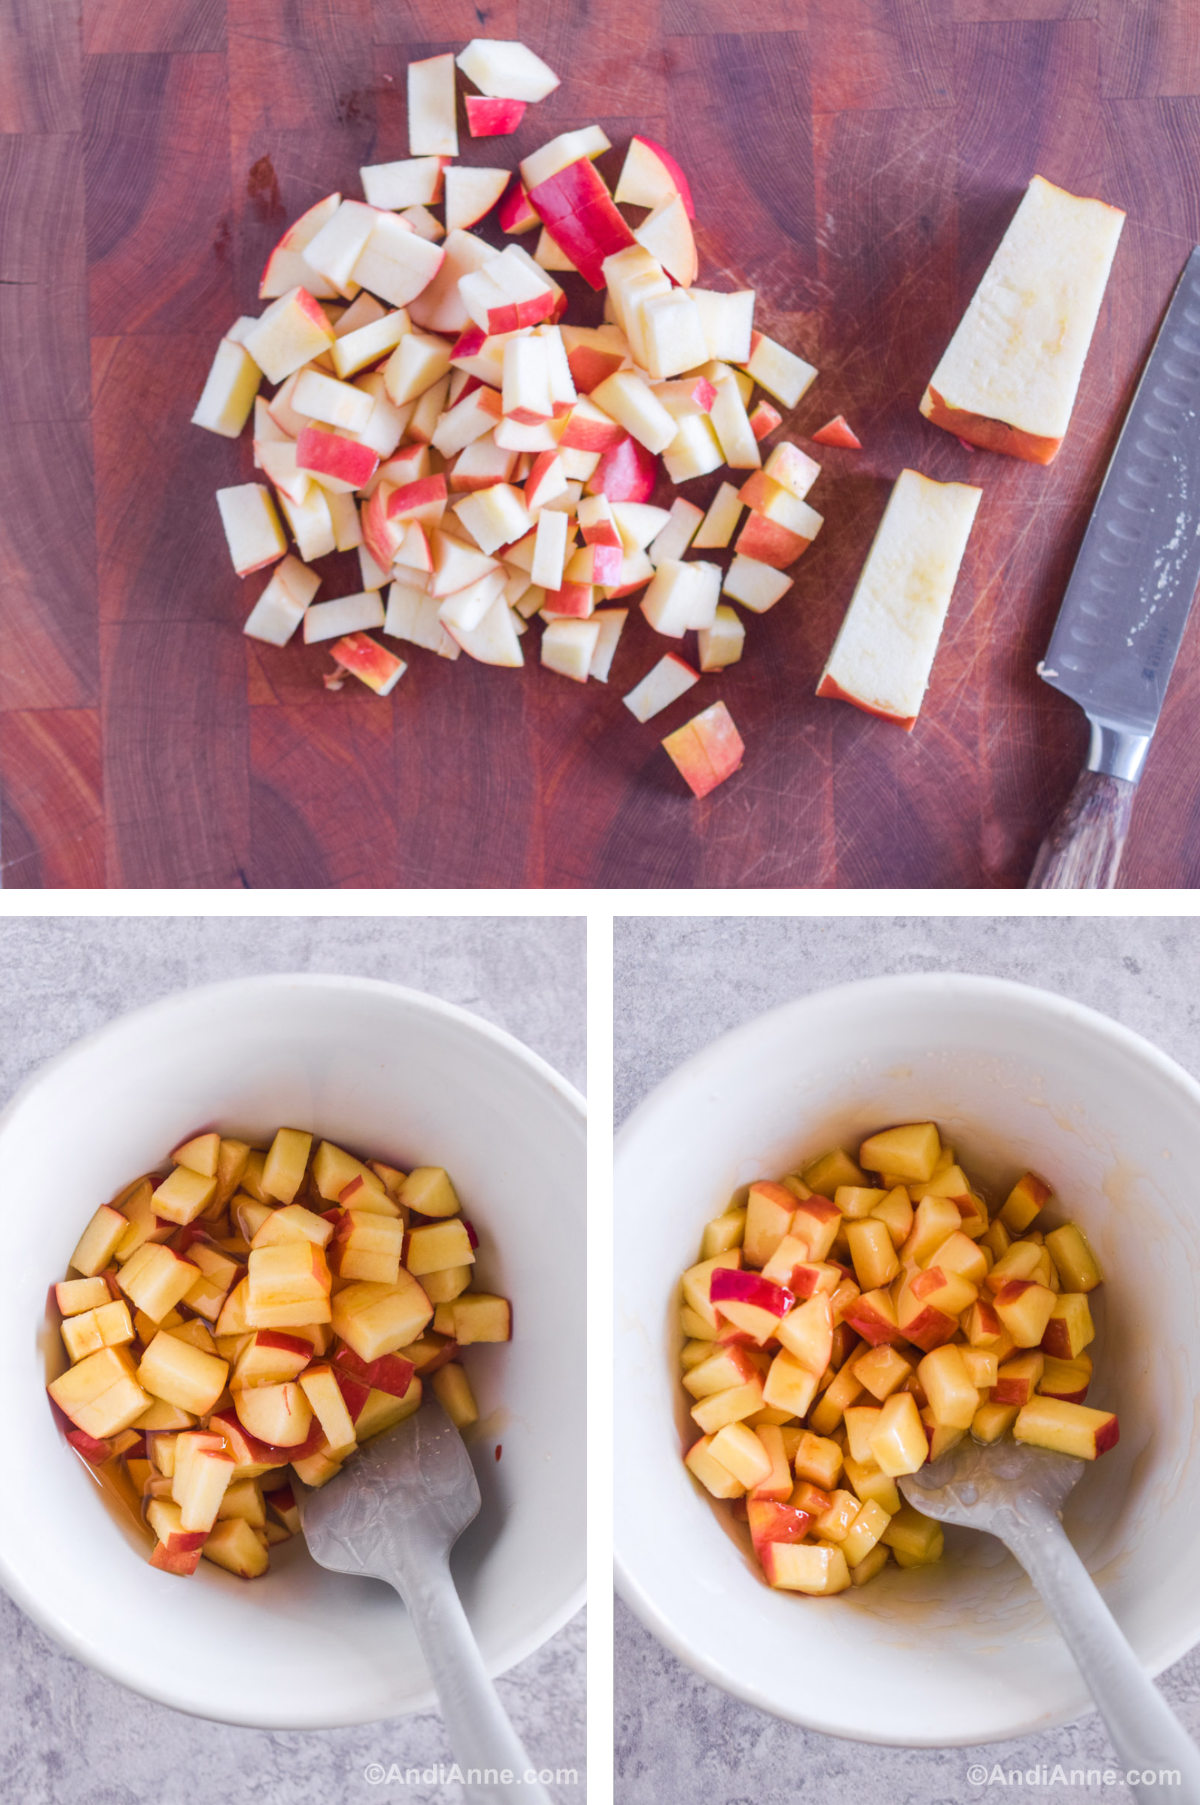 Three overhead images in one: 1. Chopped apples on a cutting board with a knife on the side. 2. Chopped apples in a bowl. 3. Chopped apples in a bowl with honey. 